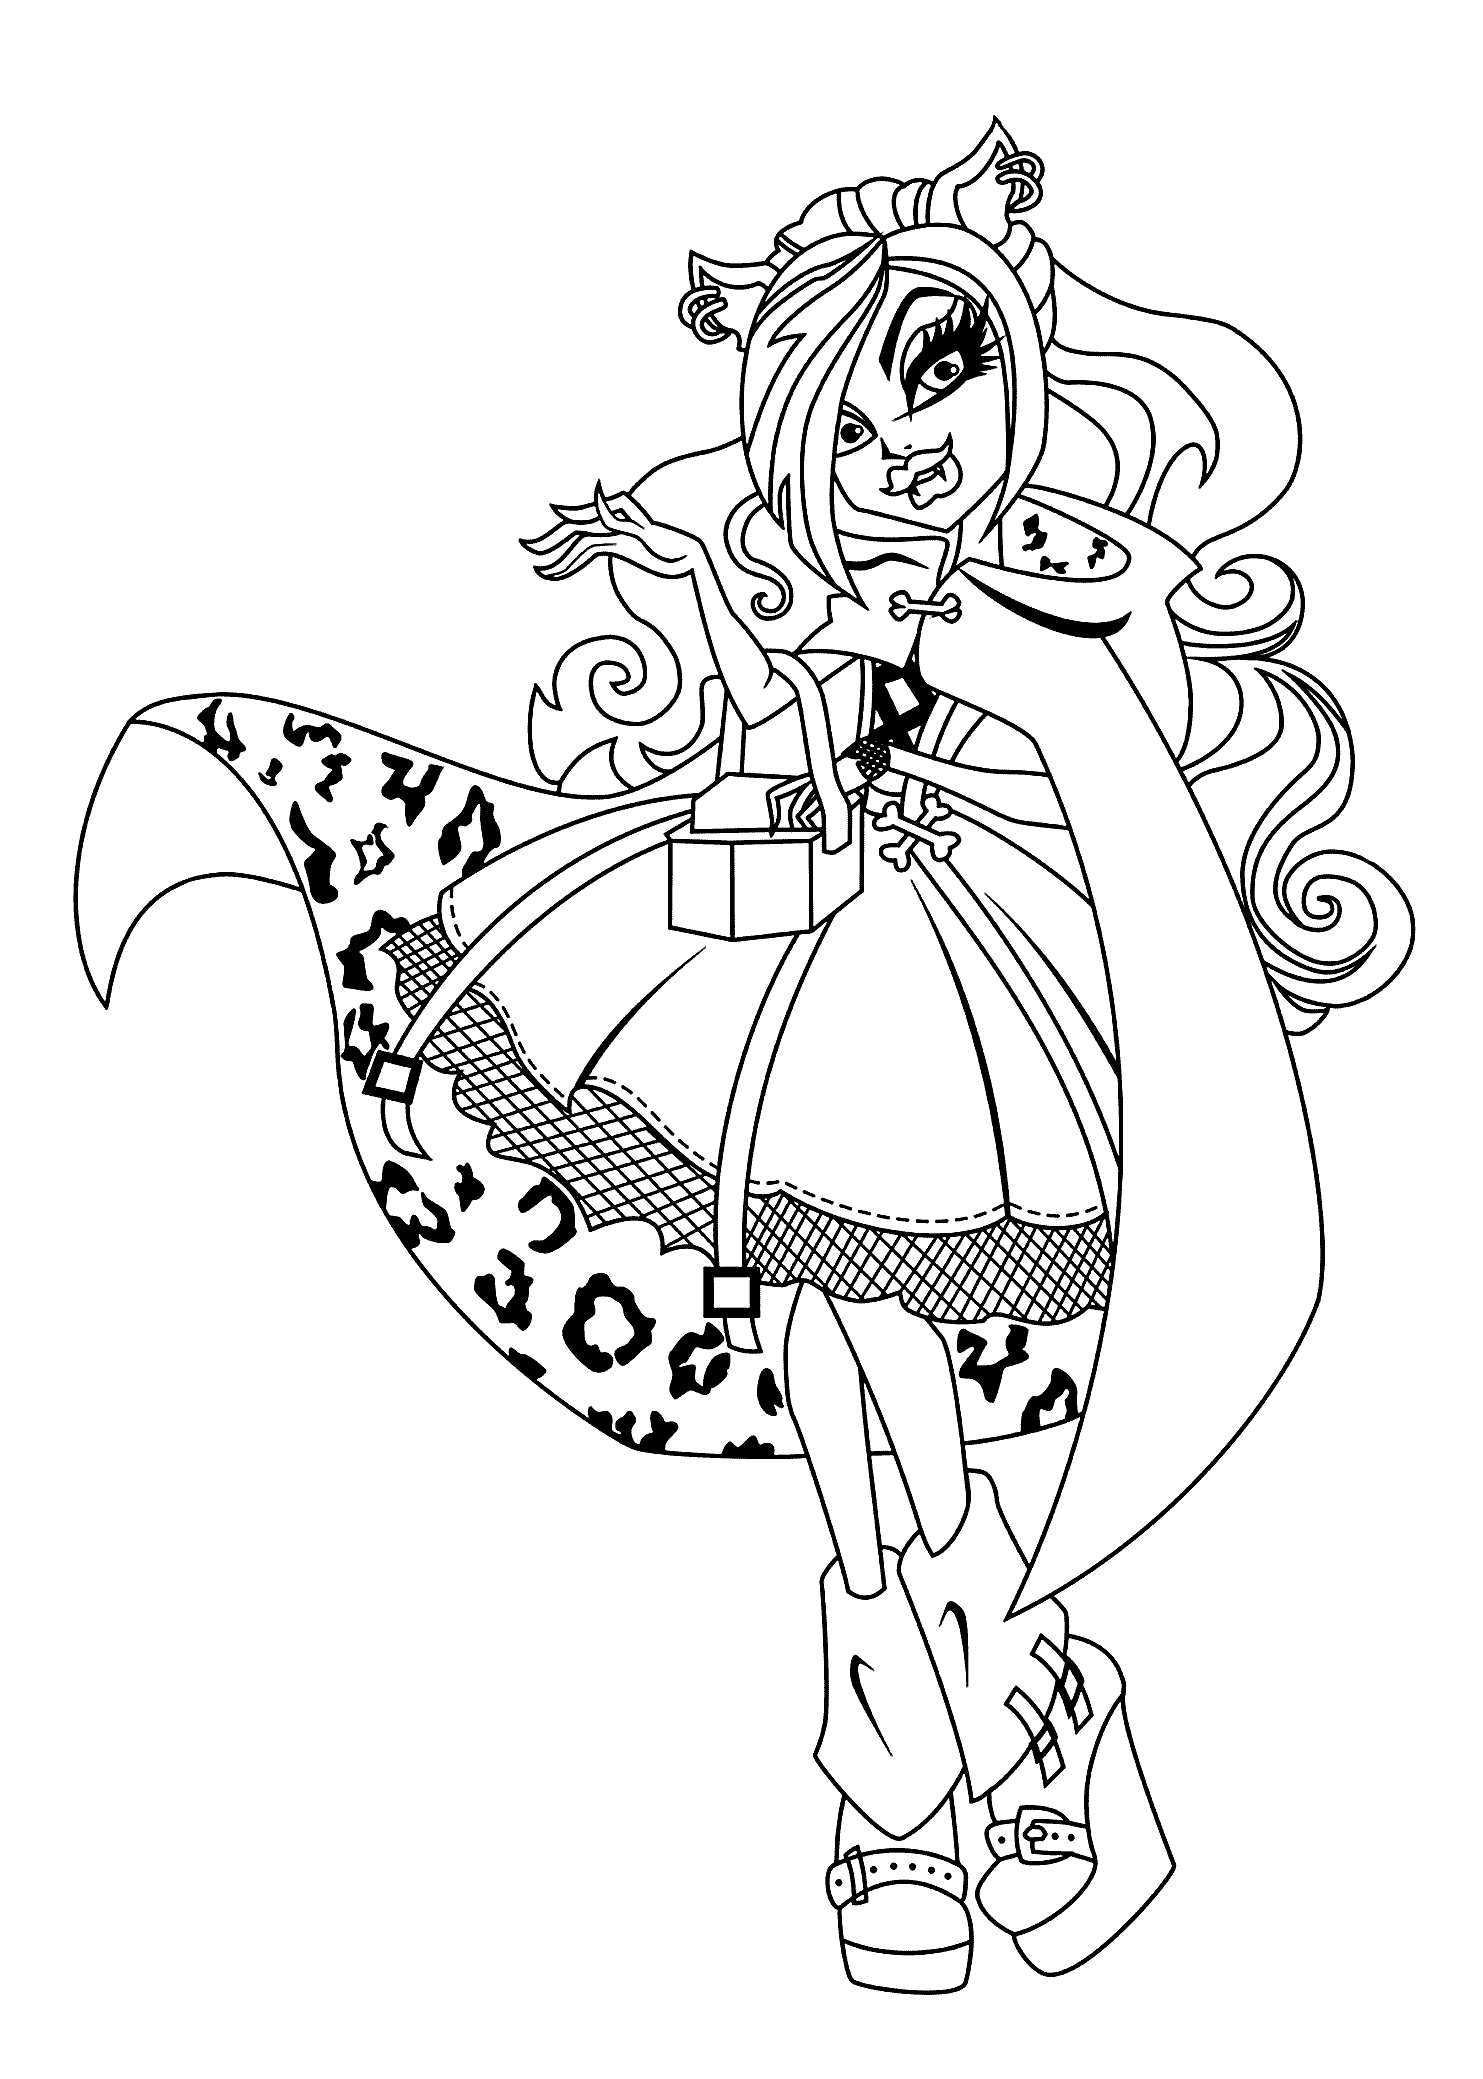 free coloring pages monster high clawdeen wolf monster high coloring pages for kids free pages coloring high monster 